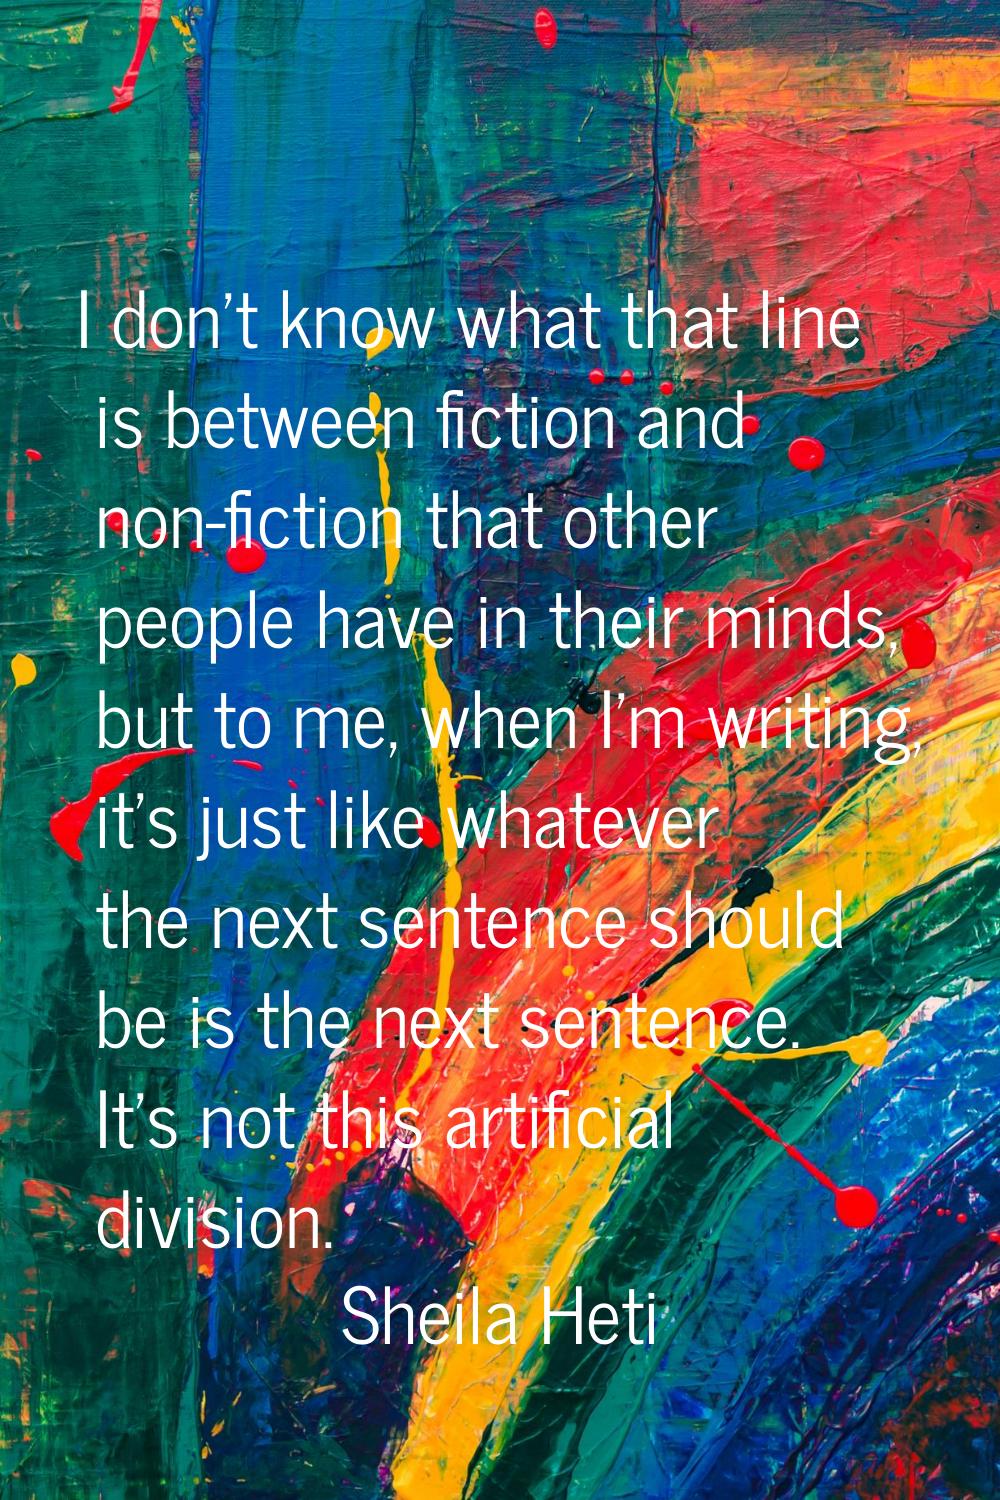 I don't know what that line is between fiction and non-fiction that other people have in their mind